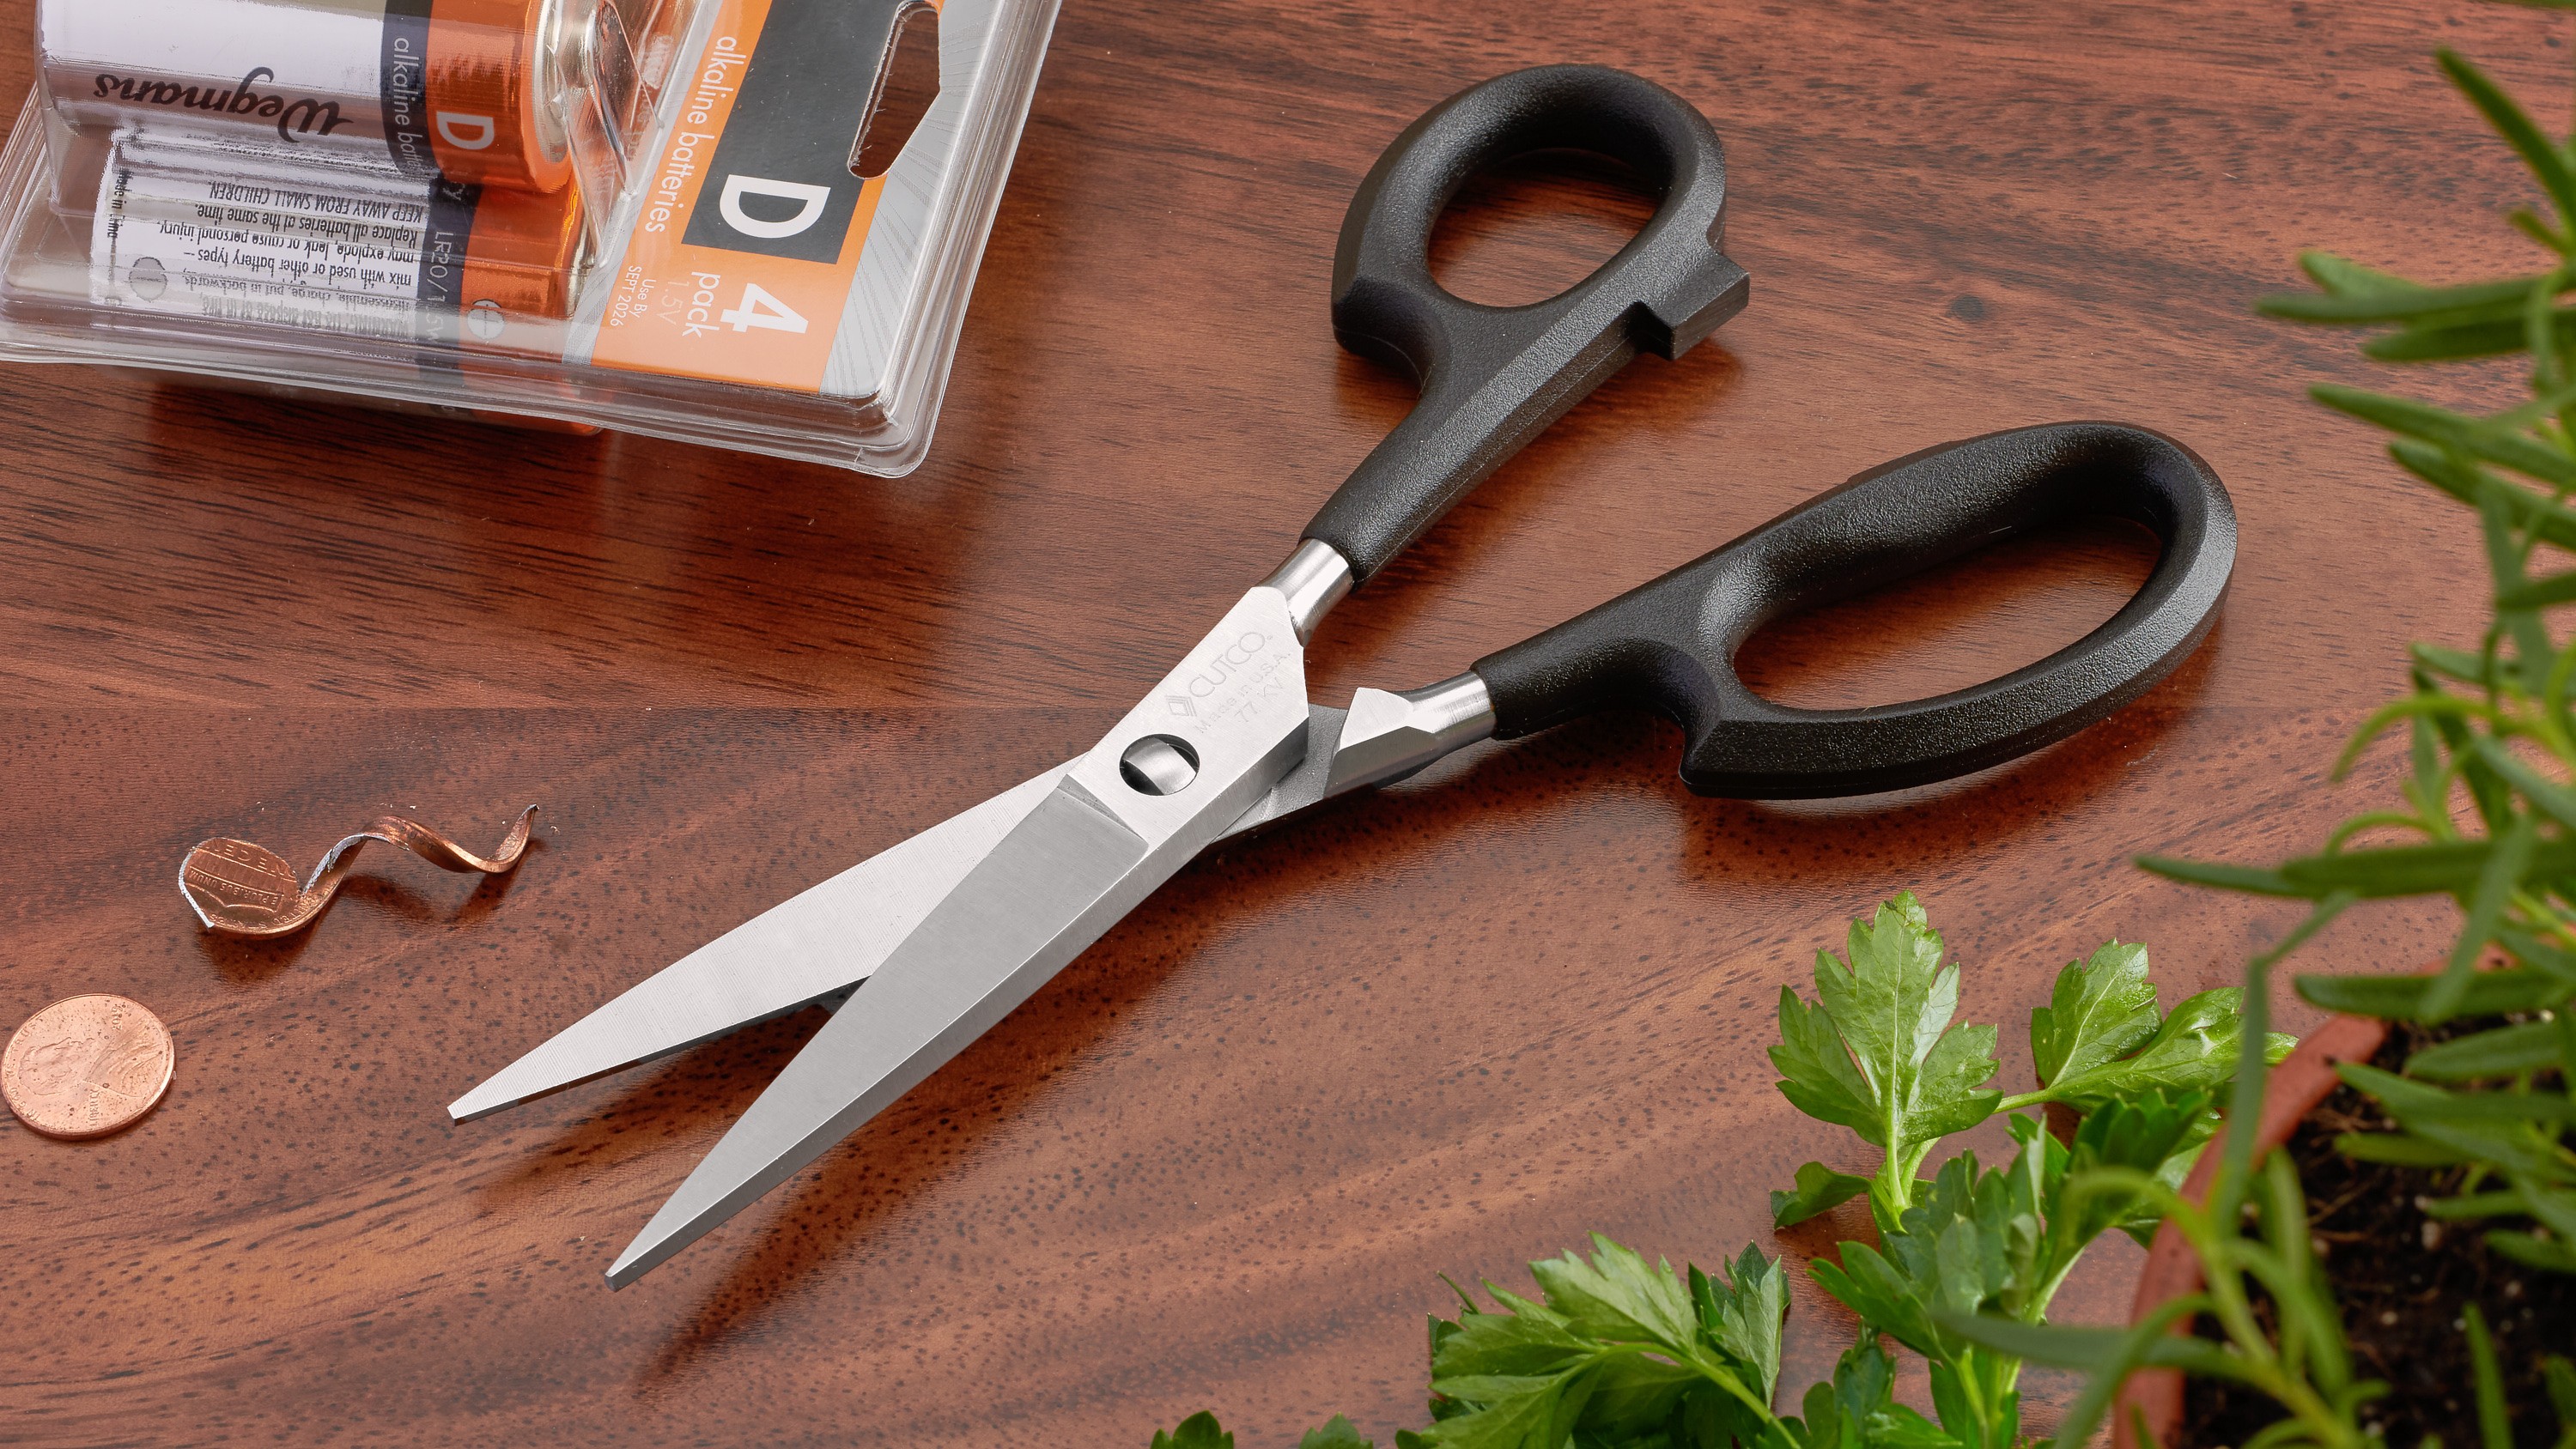 The Best Multipurpose Kitchen Scissors - The Check Stand